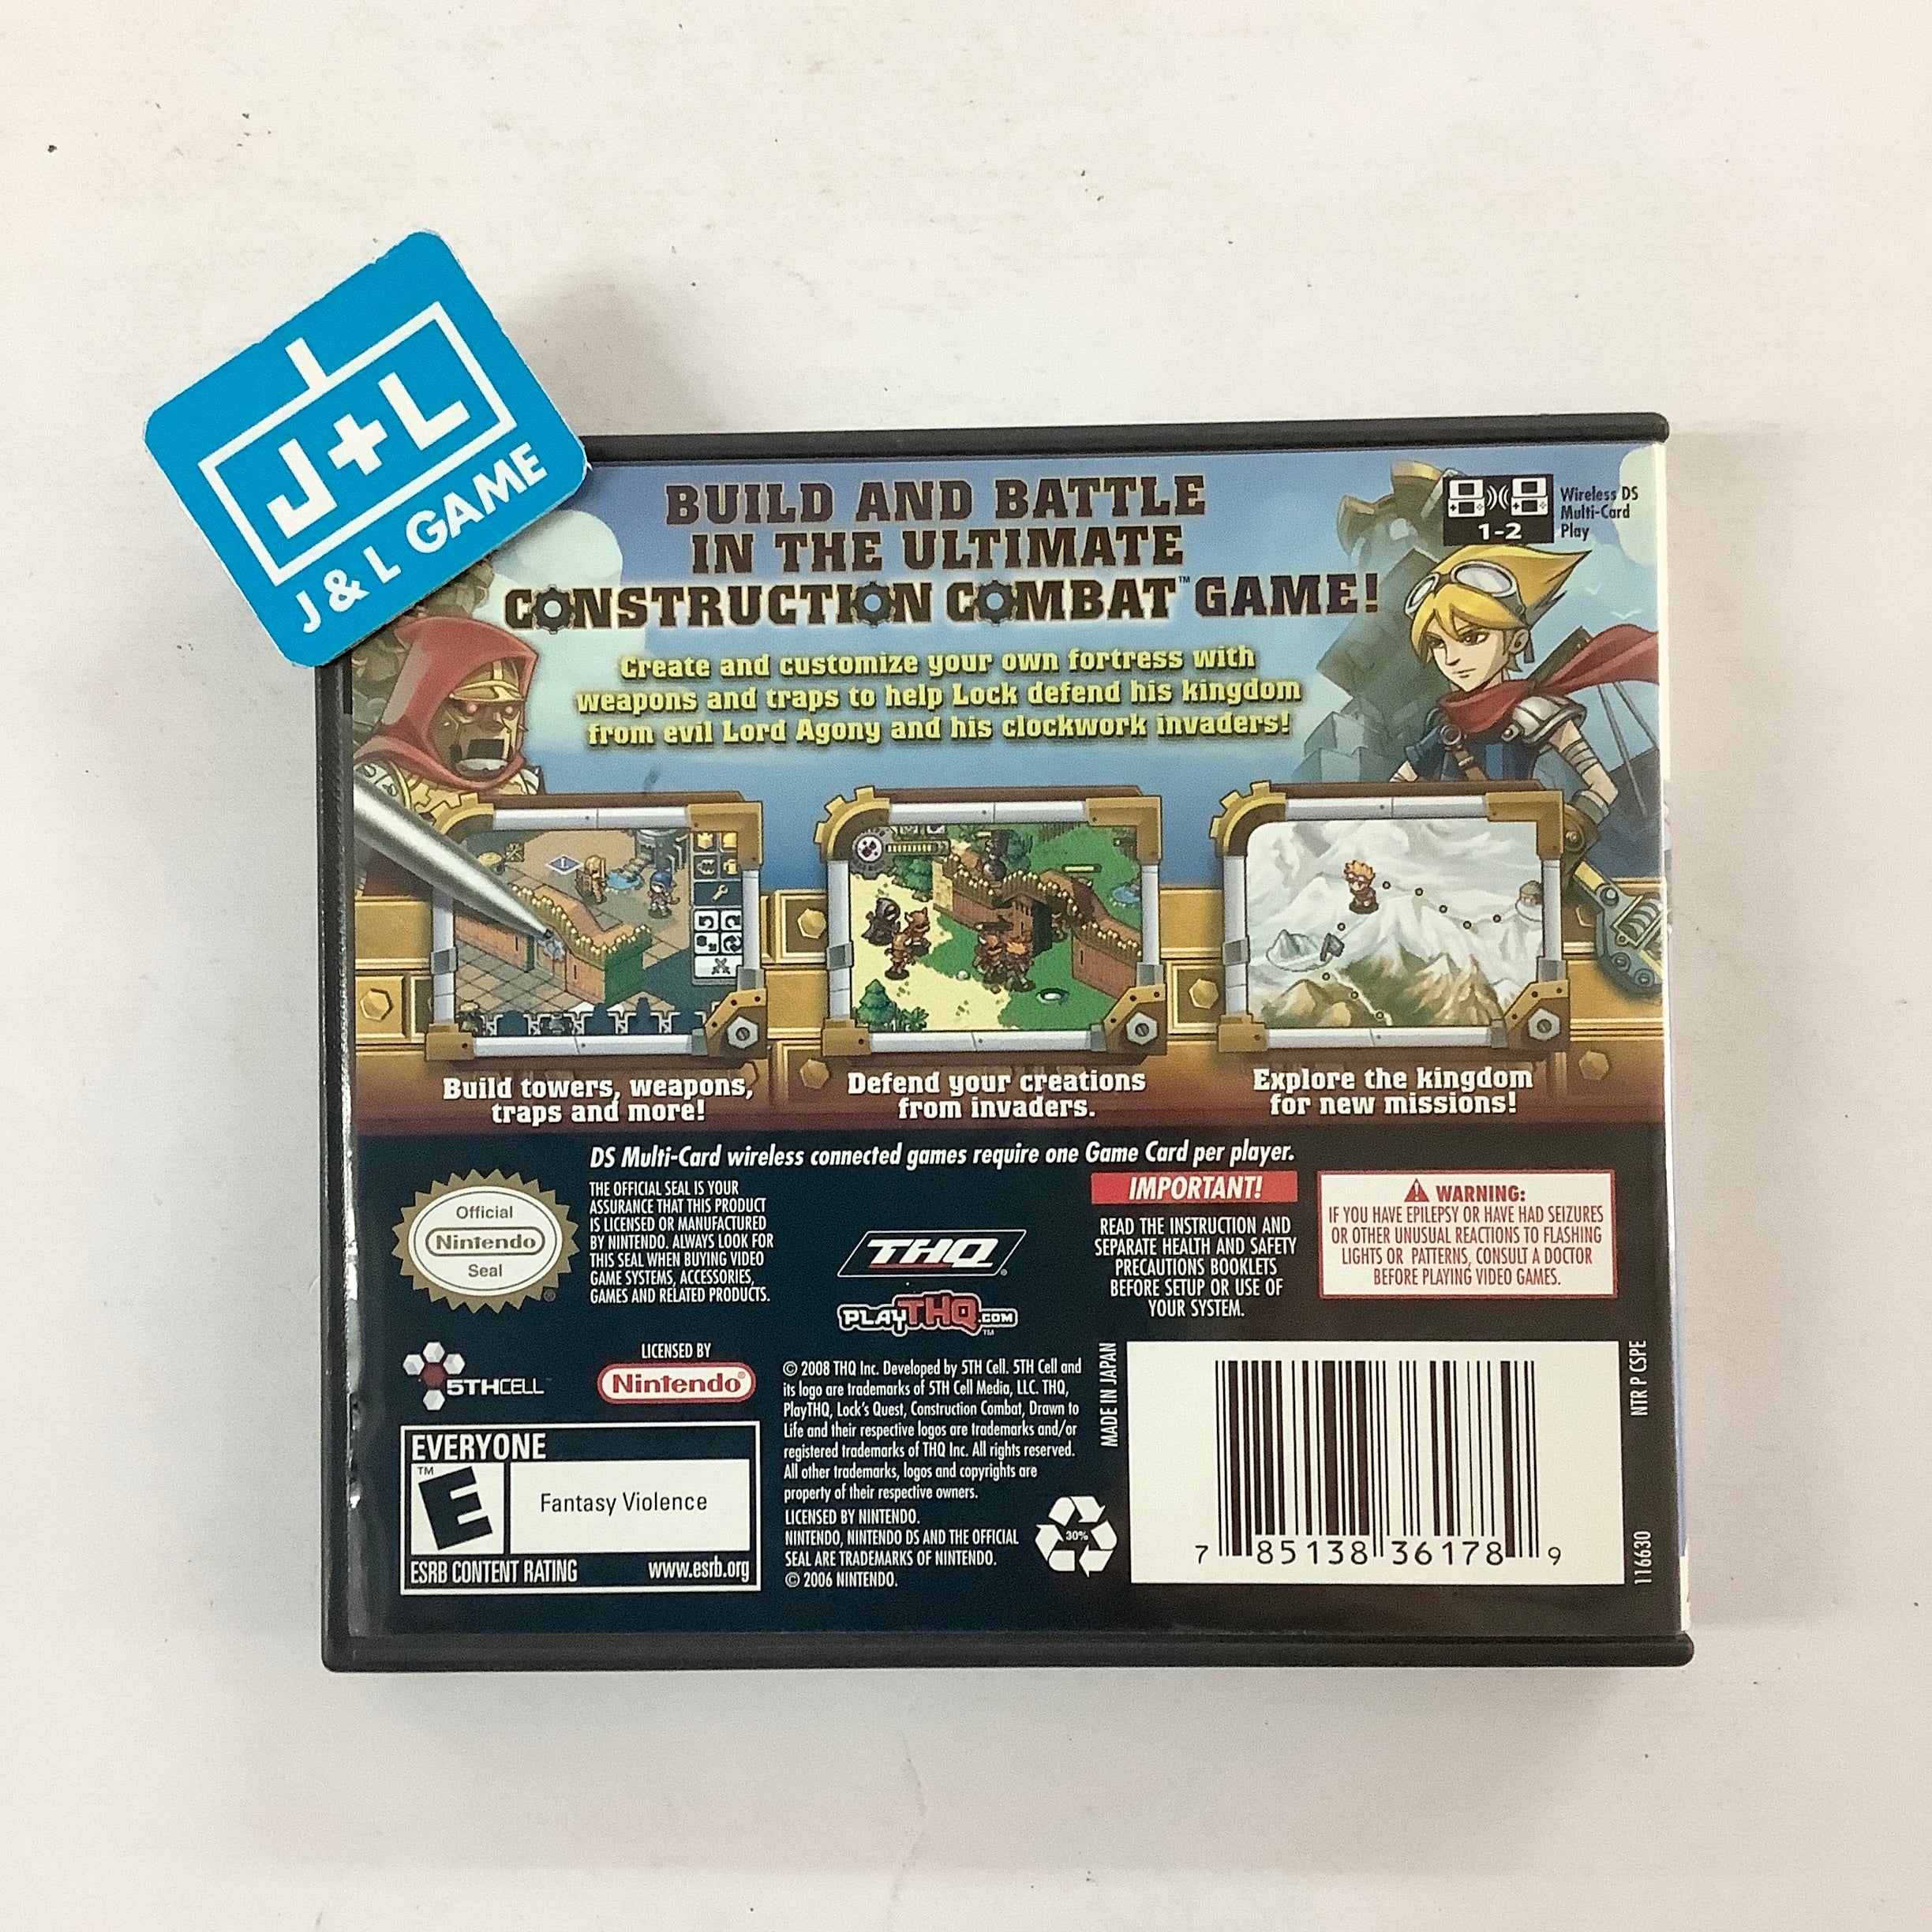 Lock's Quest - (NDS) Nintendo DS [Pre-Owned]